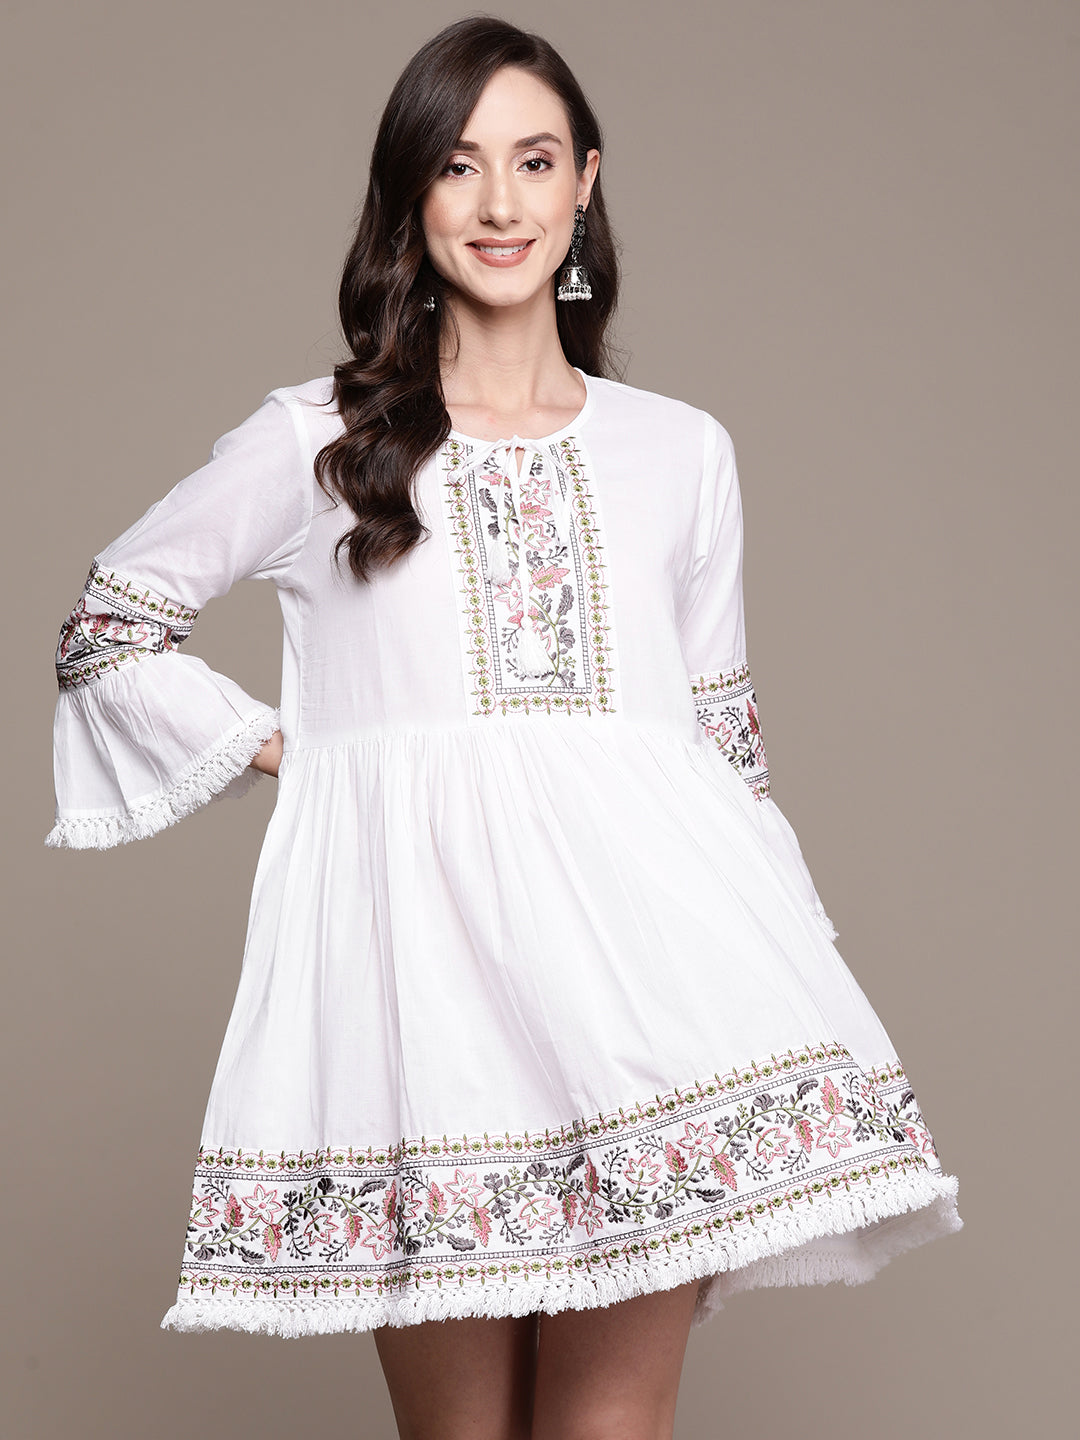 Ishin Women's White Embroidered A-Line Dress